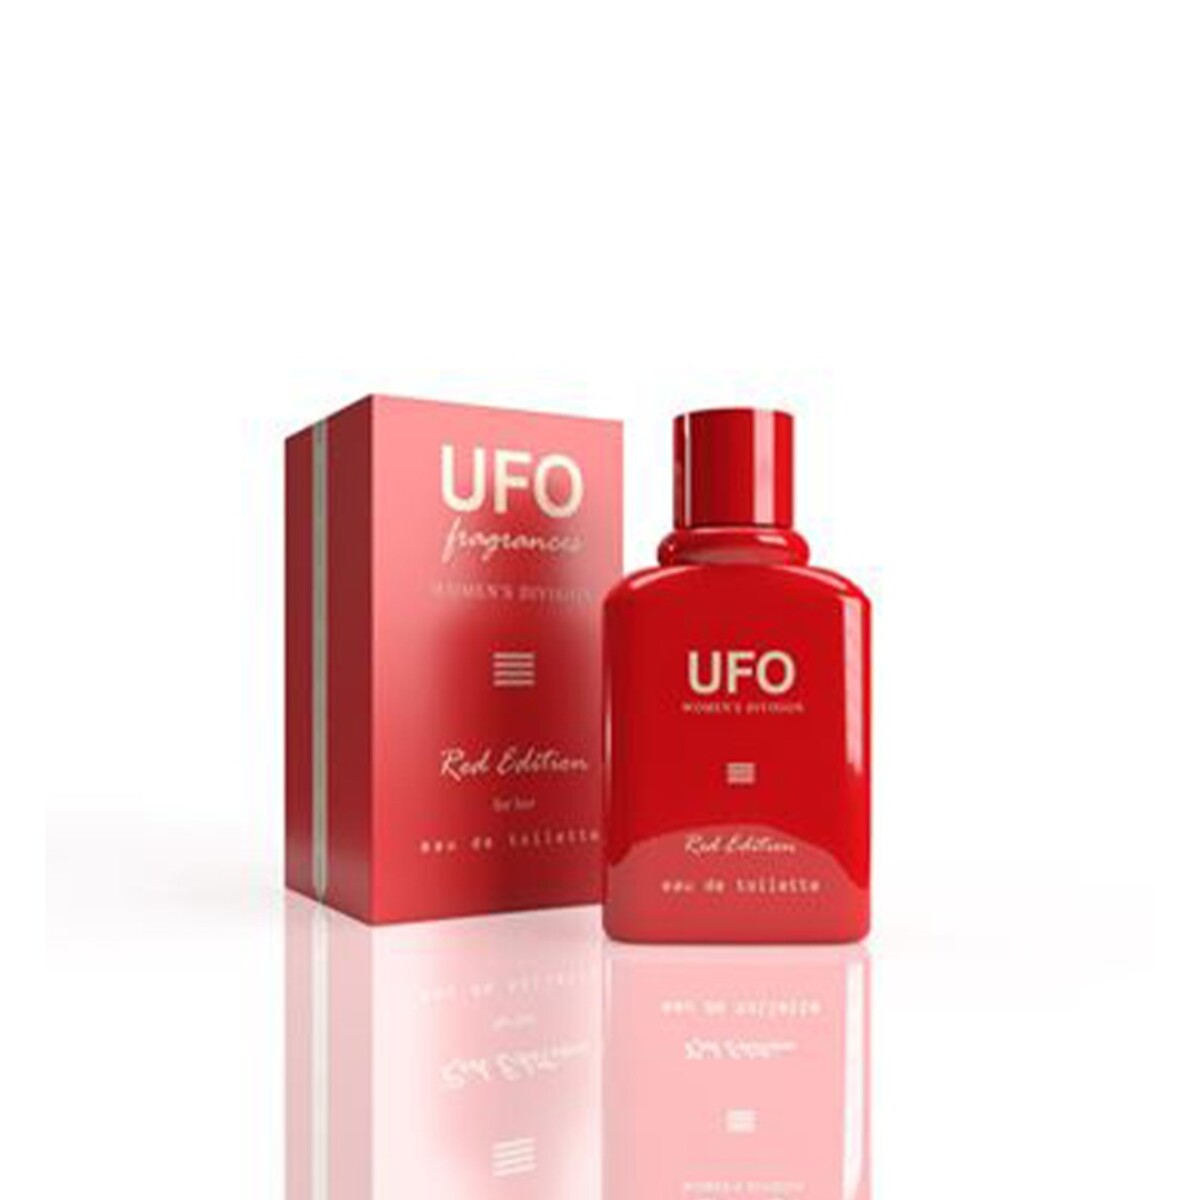 Perfume Ufo Red Edition 55ML Edt - 001 